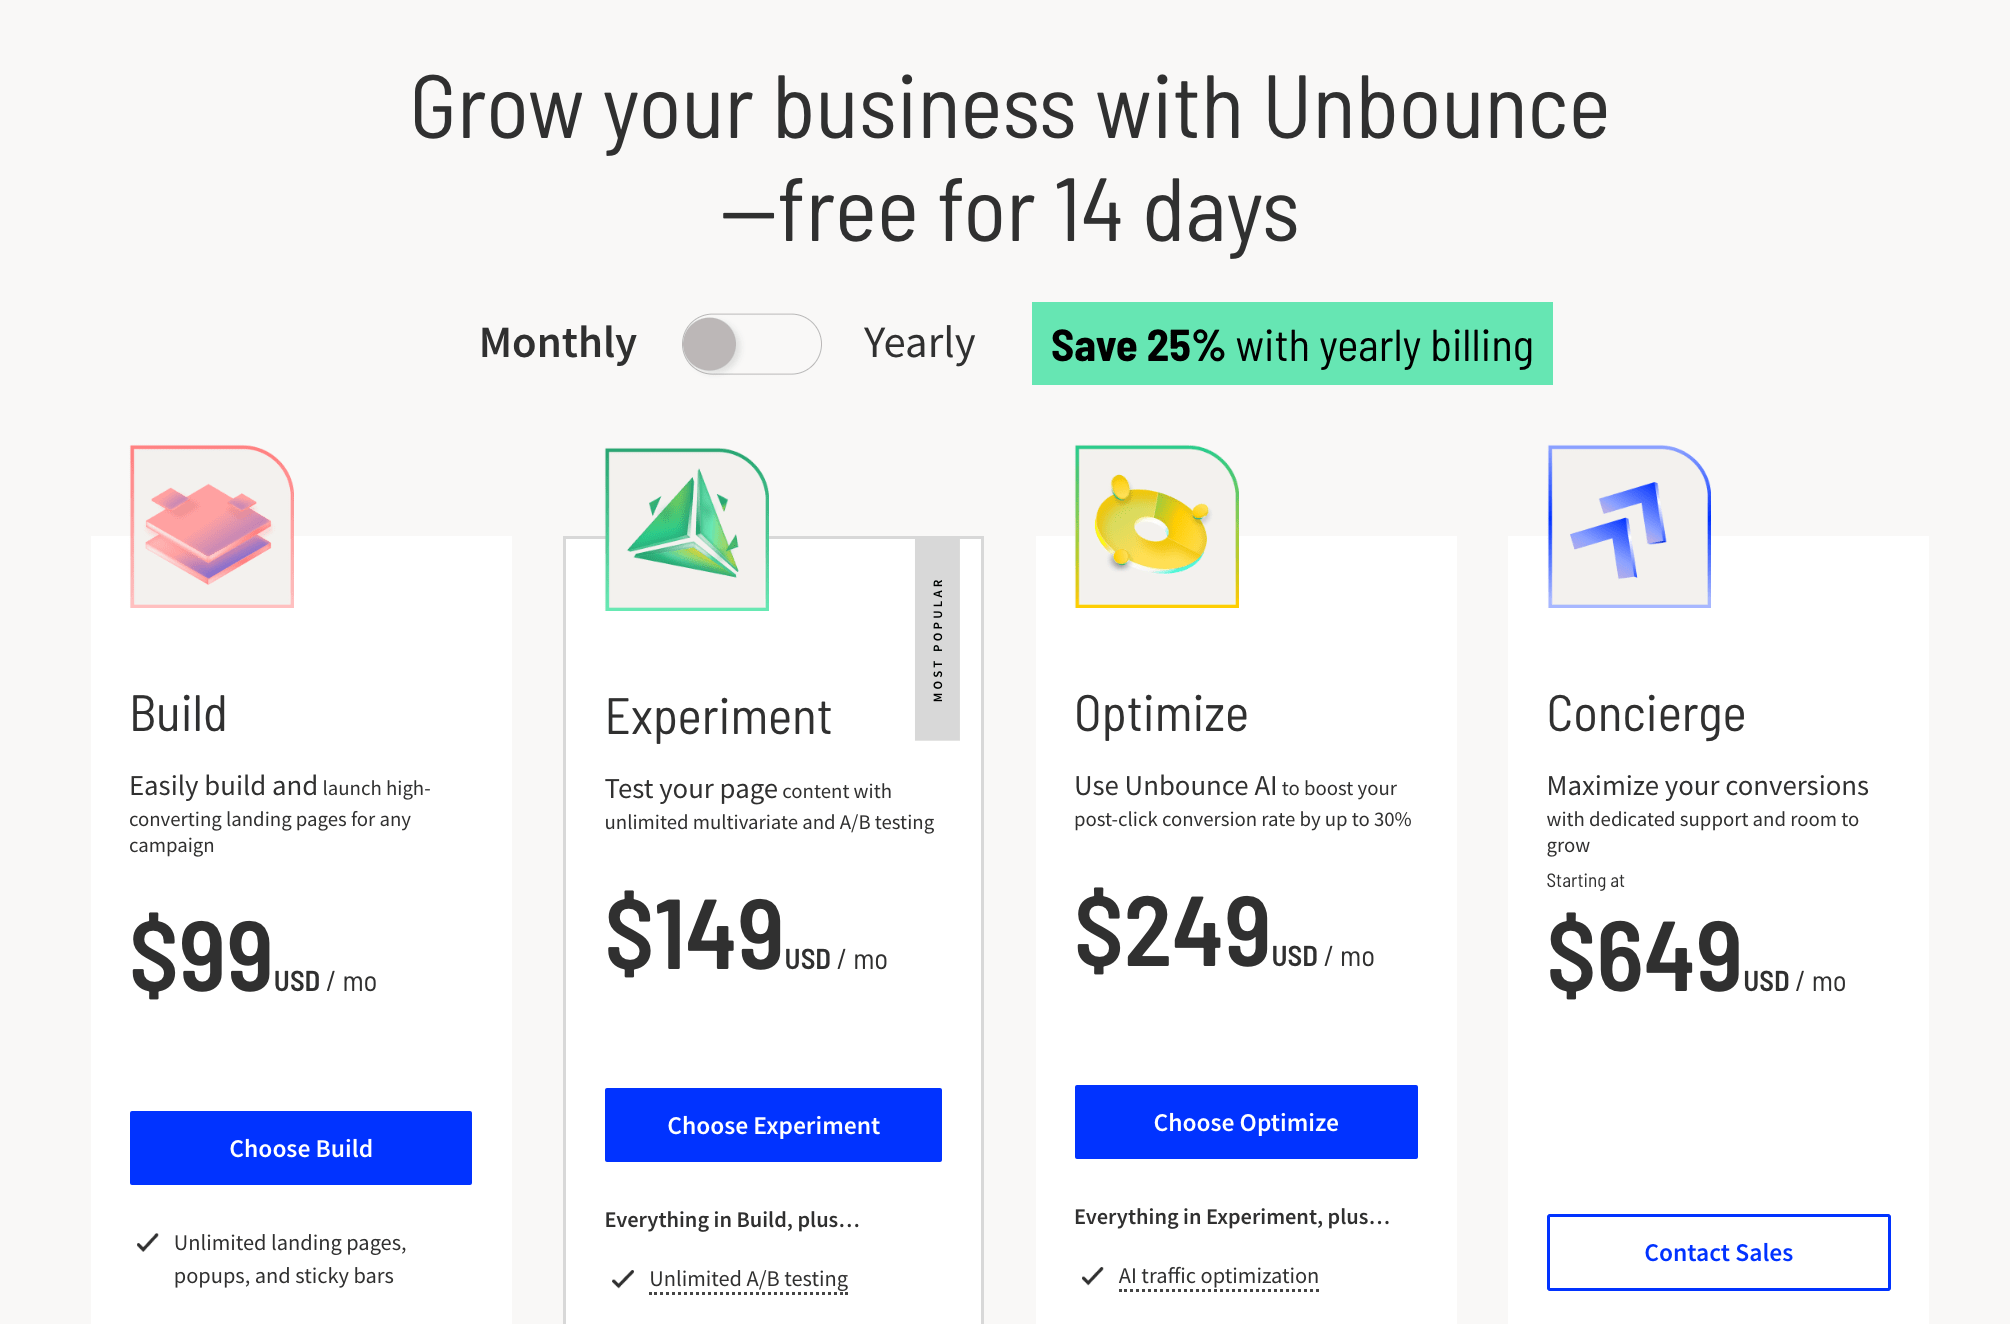 Unbounce's pricing options